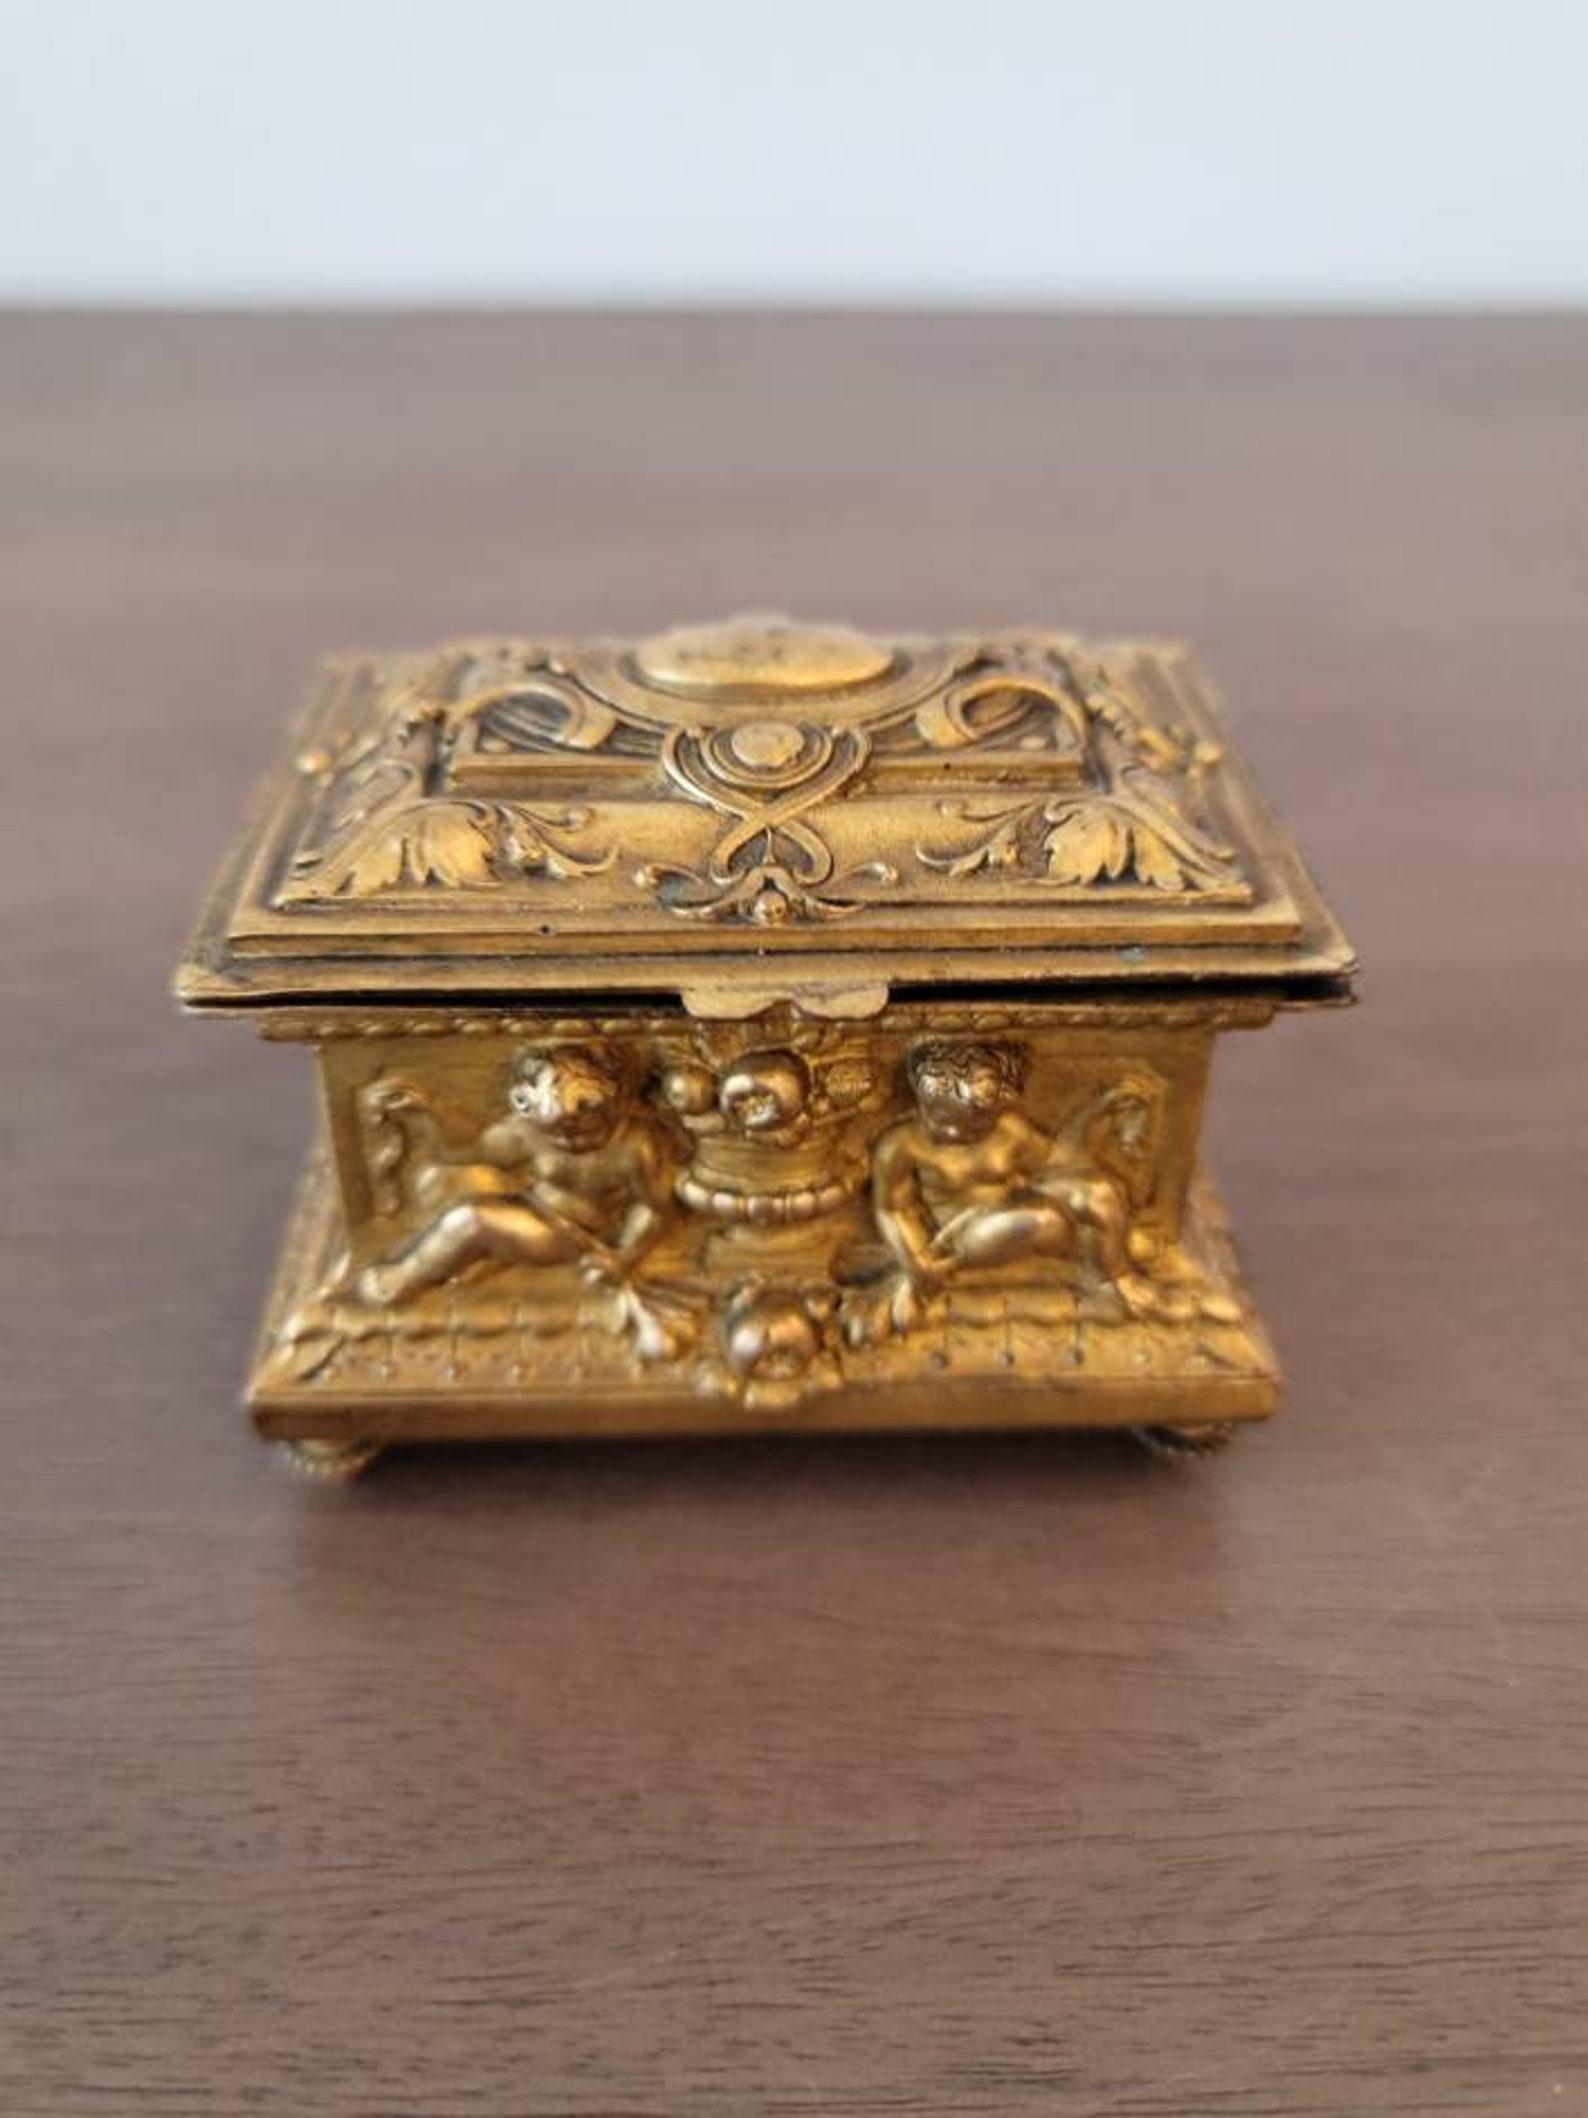 A fine diminutive French Neoclassical ormolu gilded metal jewelry casket. 

Born around the turn of the 18th/19th century, the exceptionally executed petite masterpiece features a rectangular chest shape with hinged dome lid, opening to the